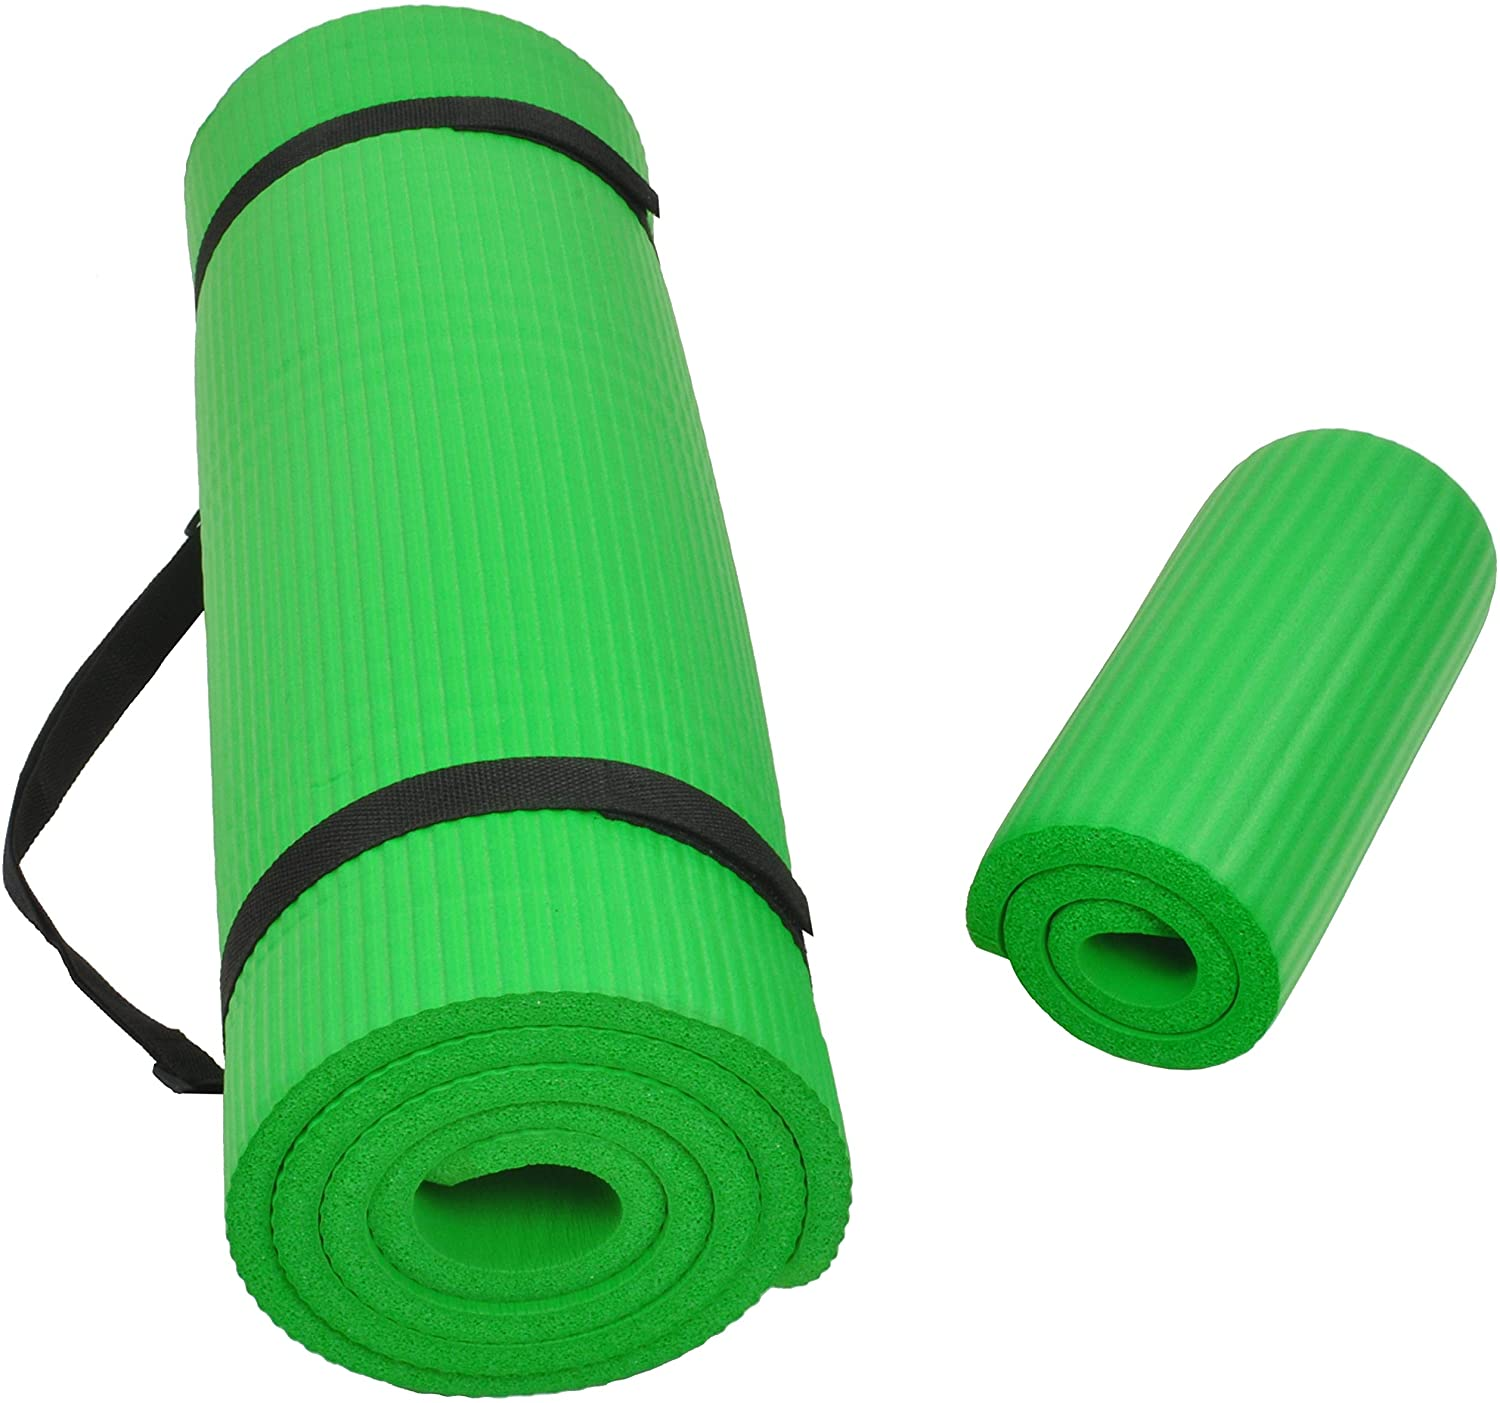 All-Purpose 1/2-Inch Extra Thick High Density Anti-Tear Exercise Yoga Mat and Knee Pad with Carrying Strap